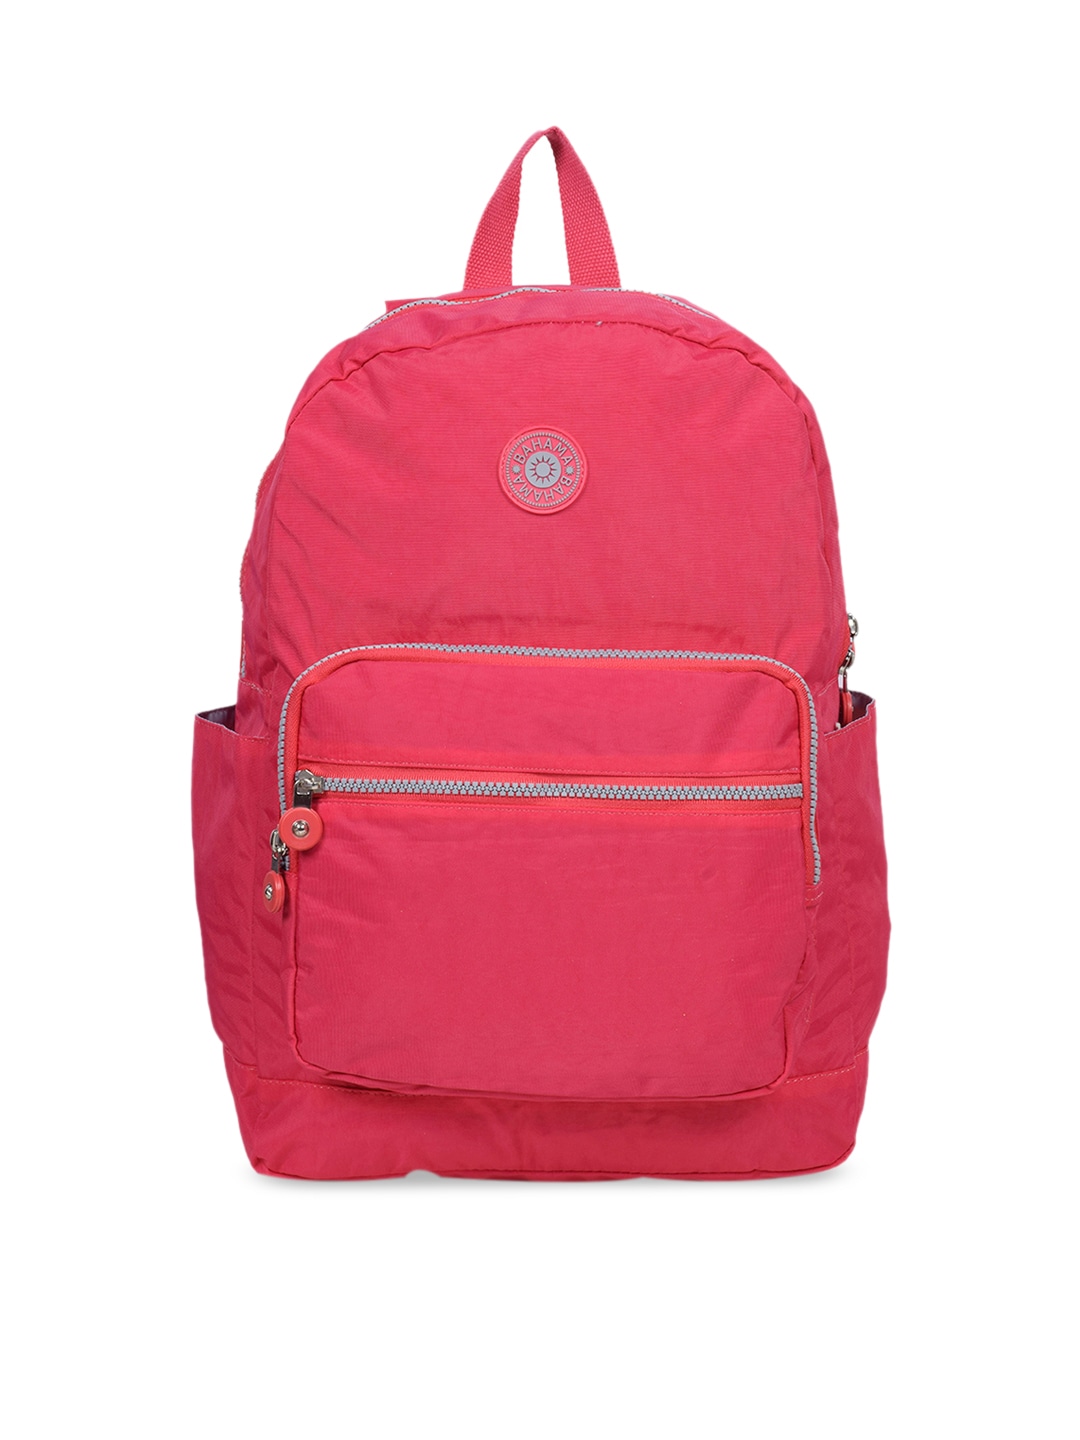 BAHAMA Unisex Red Solid Backpack Price in India